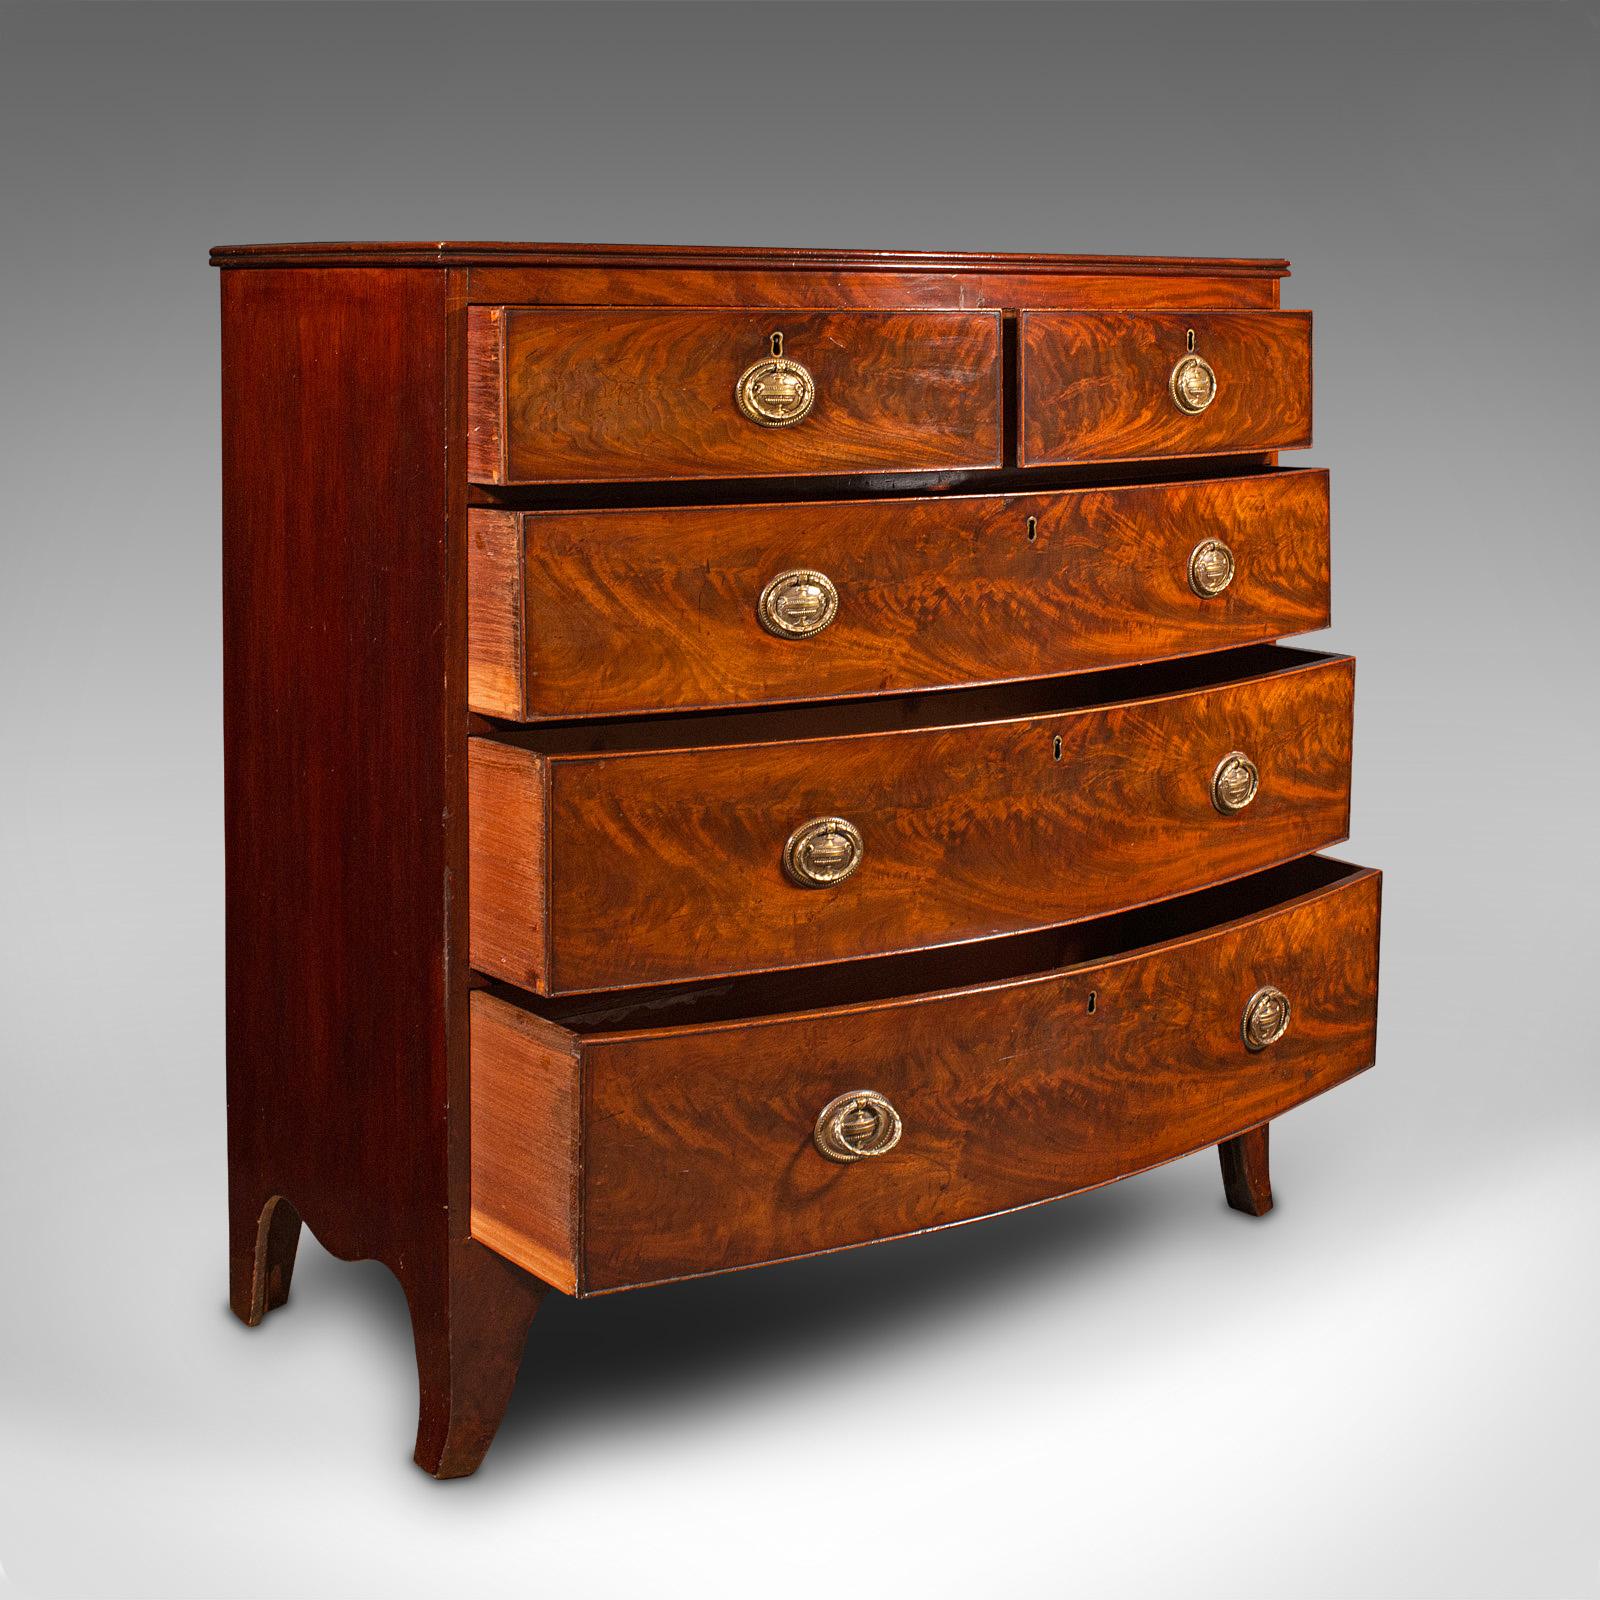 This is a large antique bow front chest of drawers. An English, mahogany tallboy, dating to the Georgian period, circa 1780.

Wonderful form and proportion to this exquisite Georgian piece
Displaying a desirable aged patina and in very good